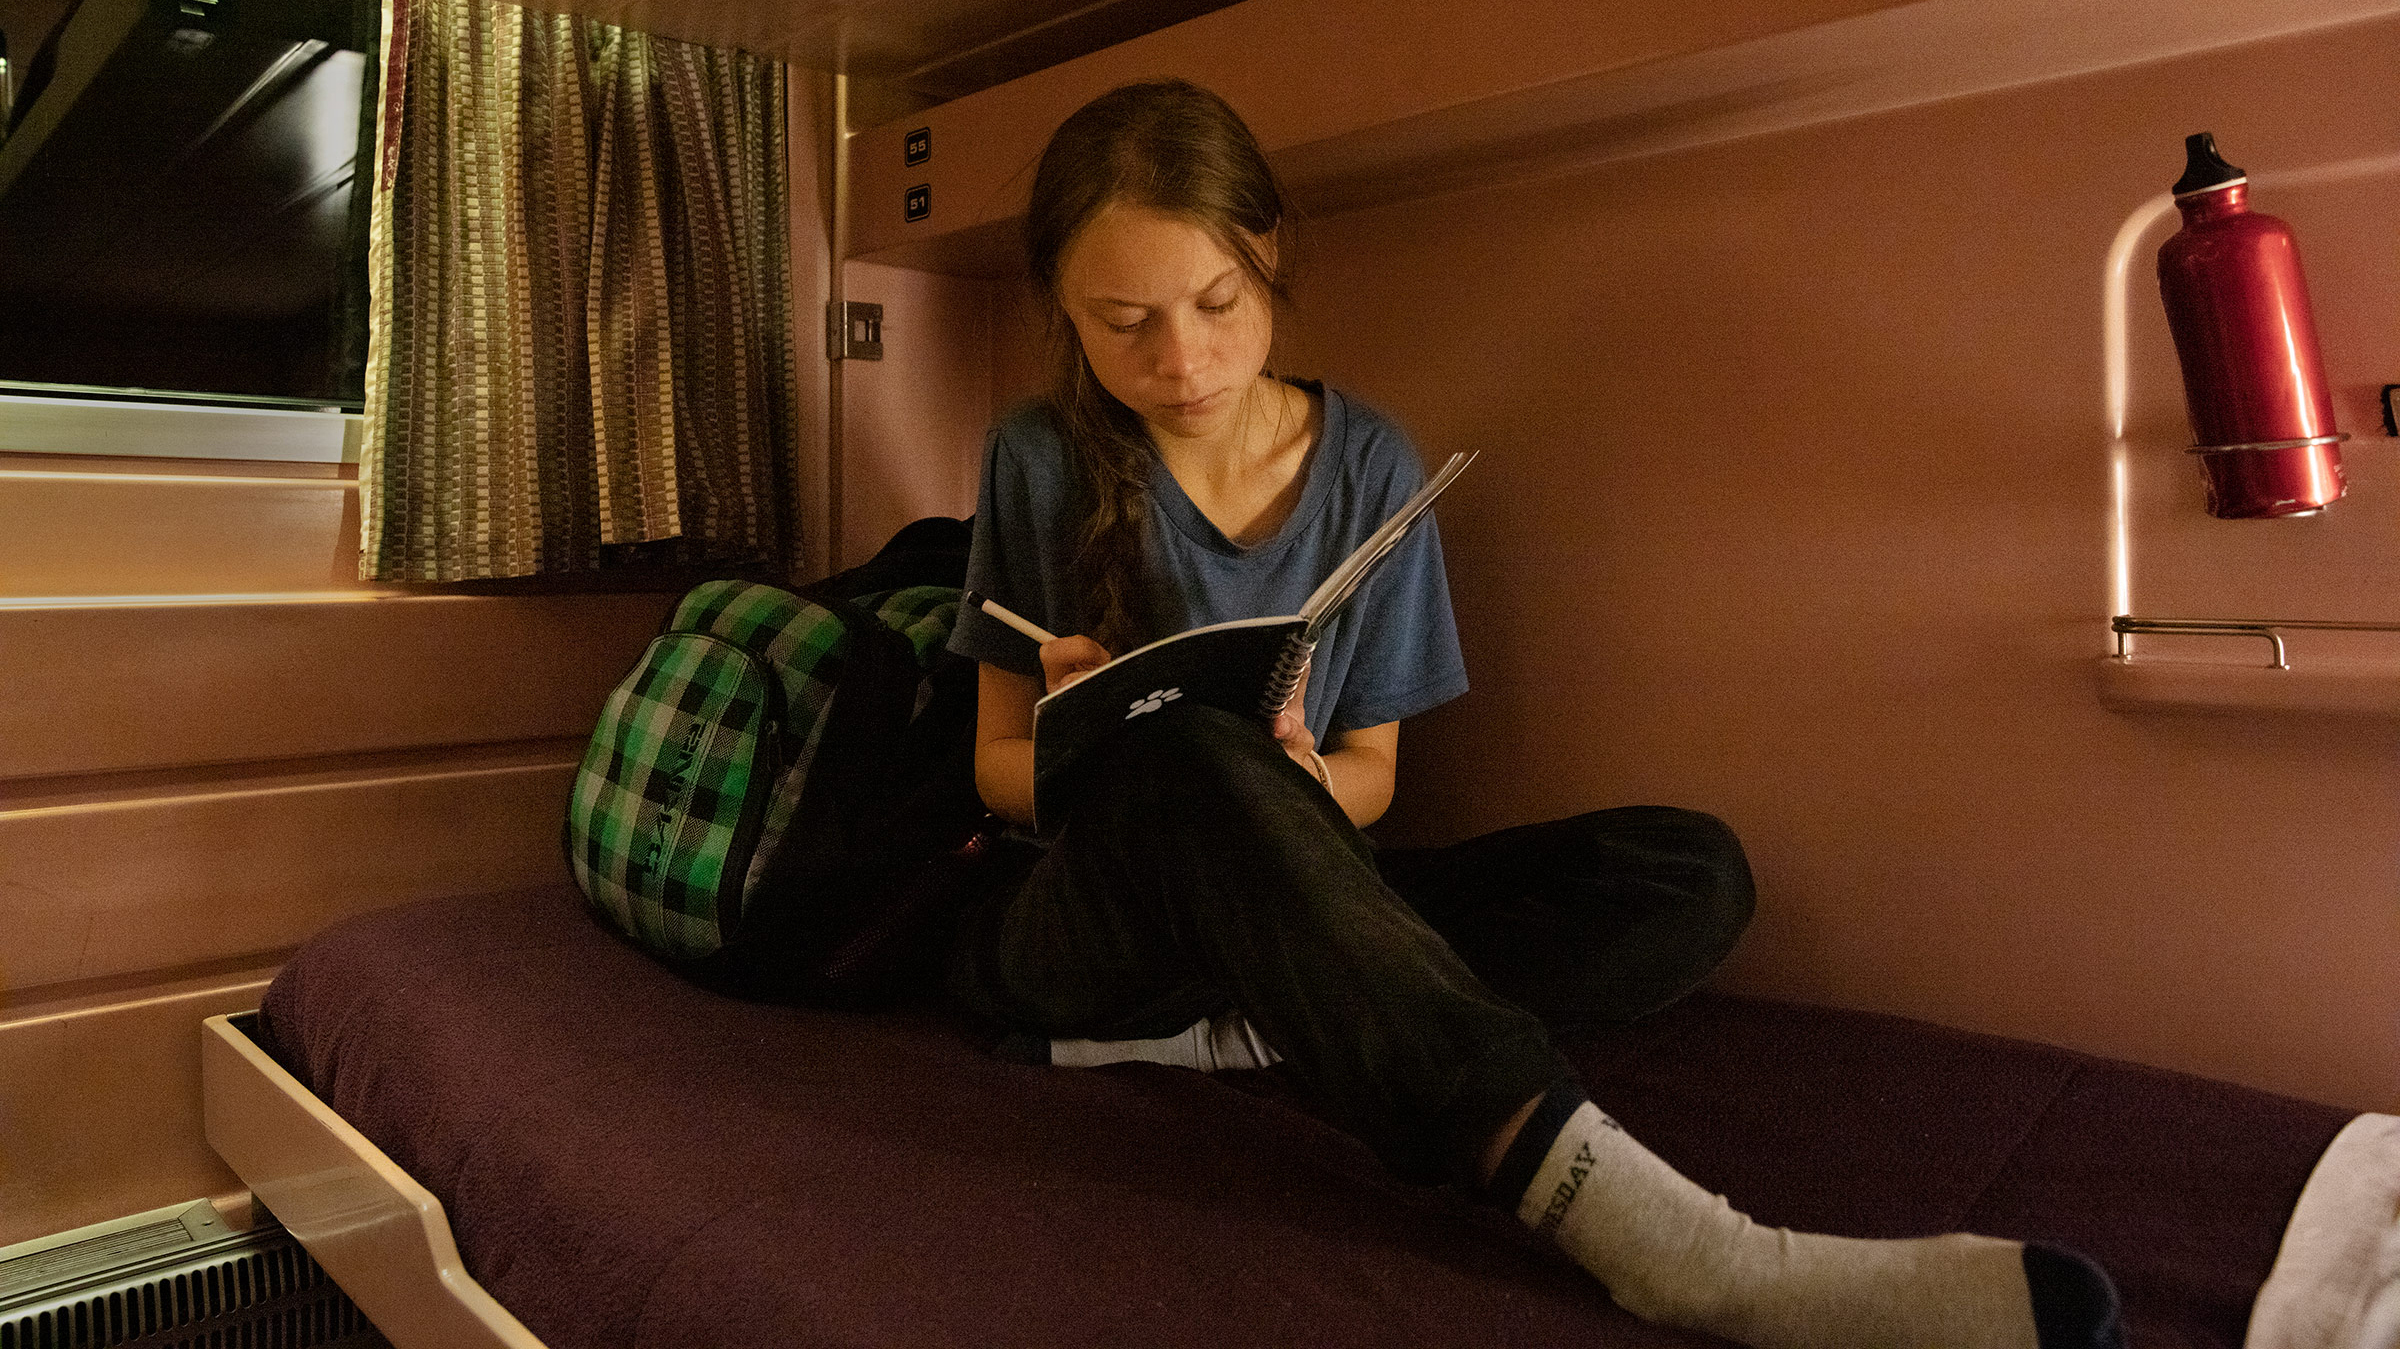 Greta Thunberg writes in her journal on the train as she travels from Lisbon to Madrid for a U.N. climate conference on Dec. 5, 2019. (Evgenia Arbugaeva for TIME)